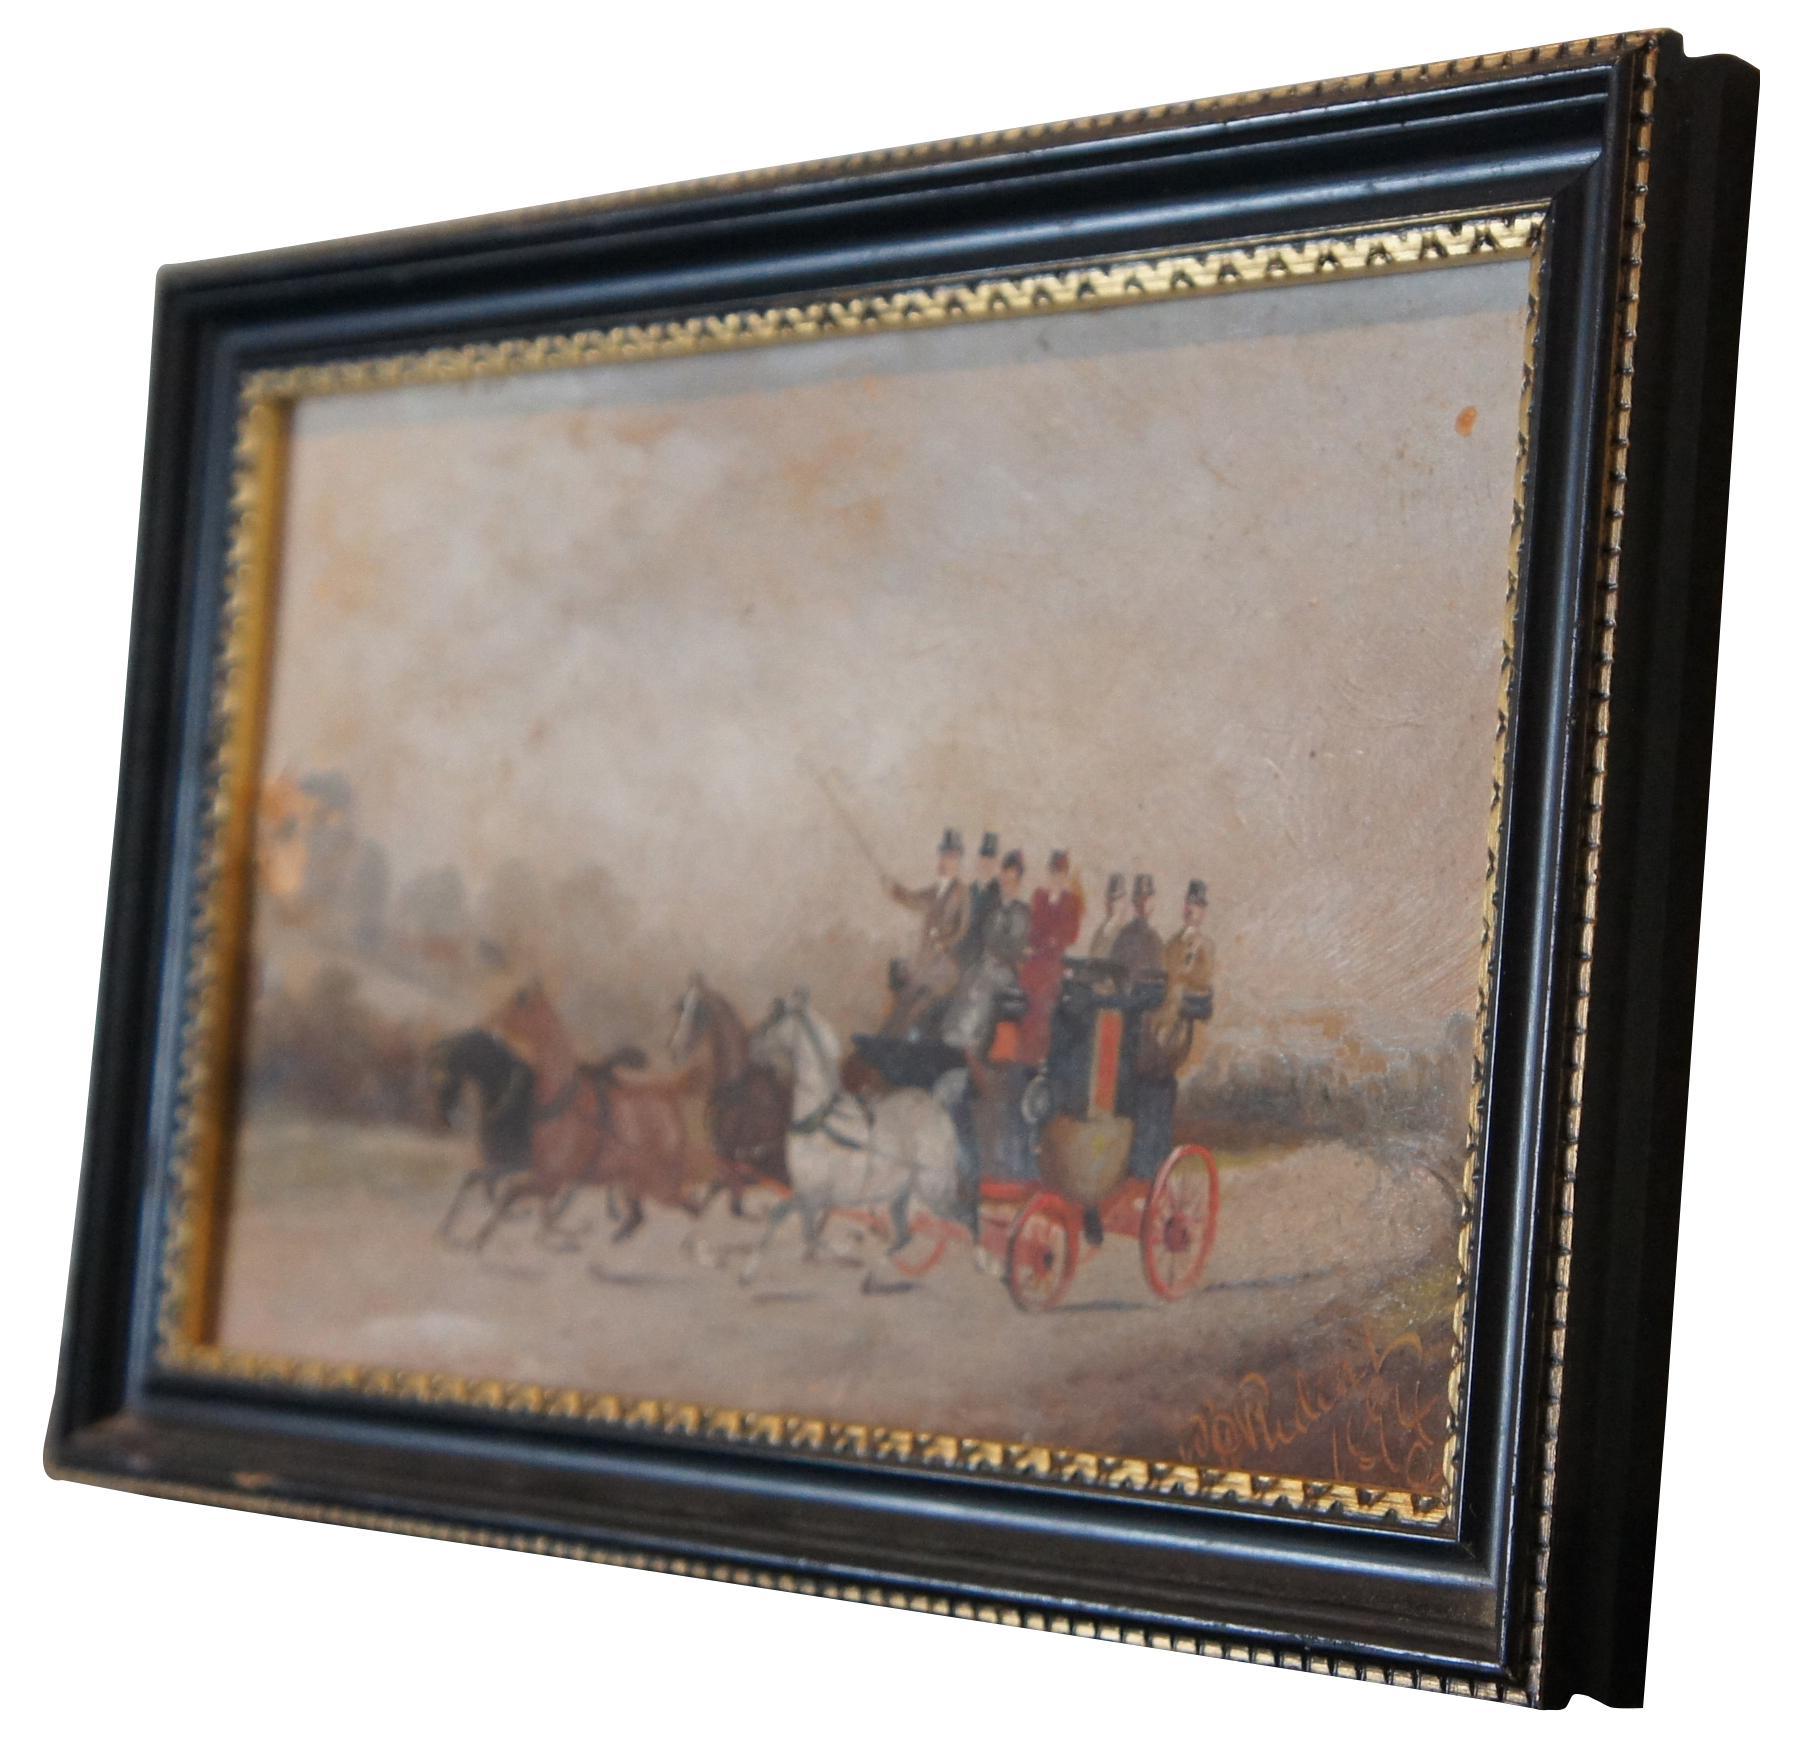 Antique oil painting on canvas painting showing a landscape of a road being traversed by a full stagecoach pulled by a team of three horses, with men / women dressed in formal attire. Signed in lower corner and dated 1894 (although the label on the